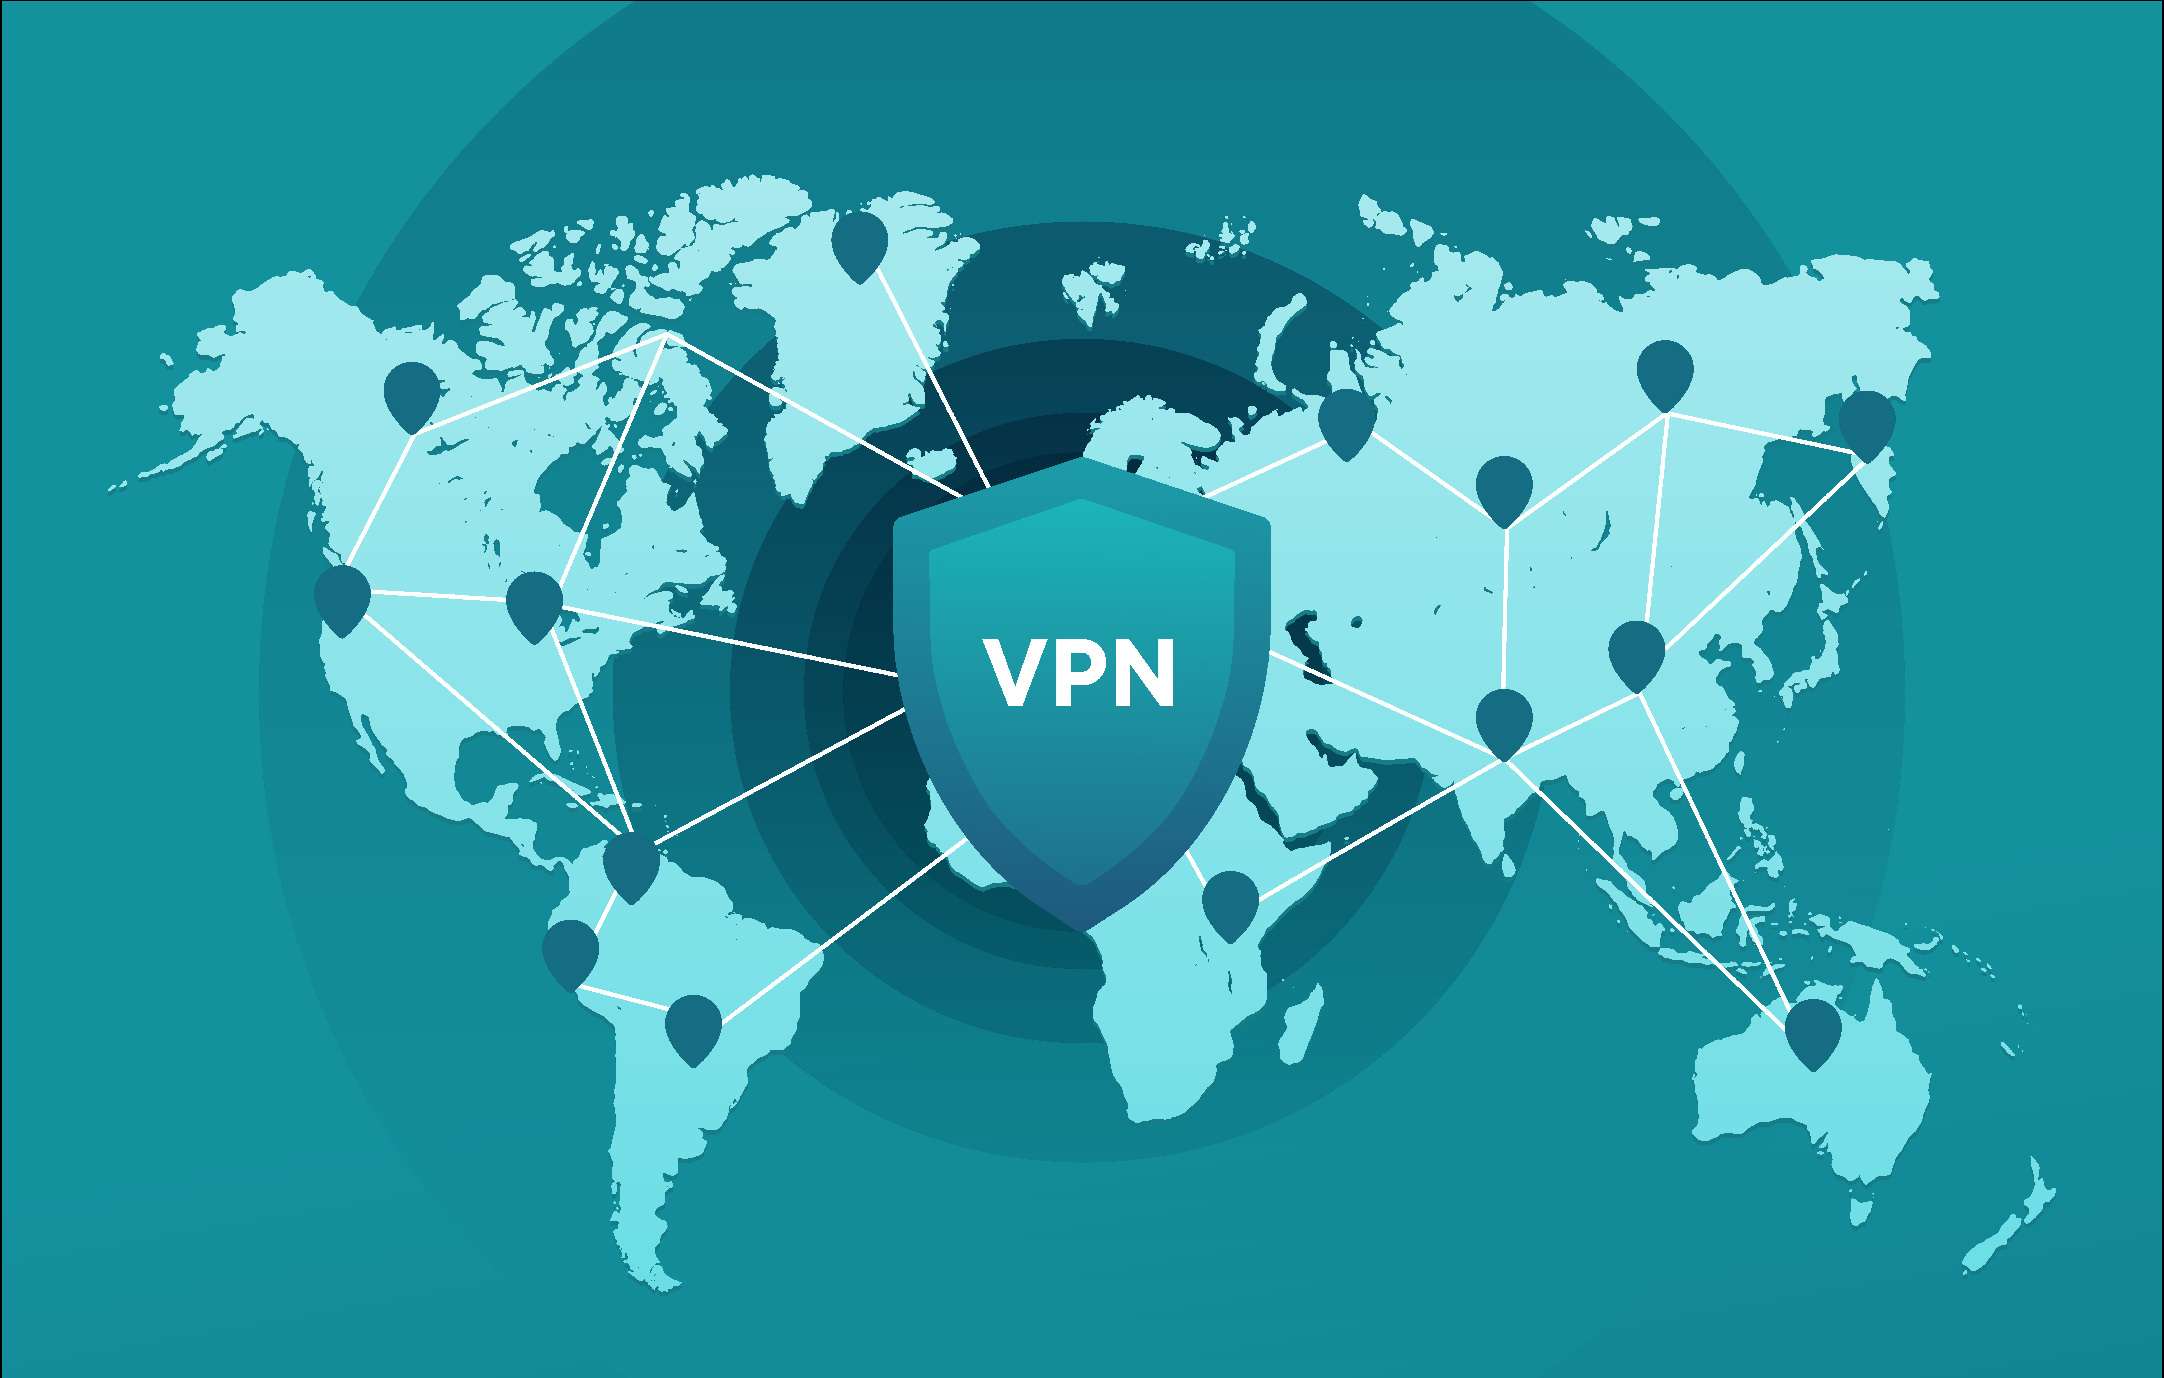 The best VPNs of 2020: prices and features